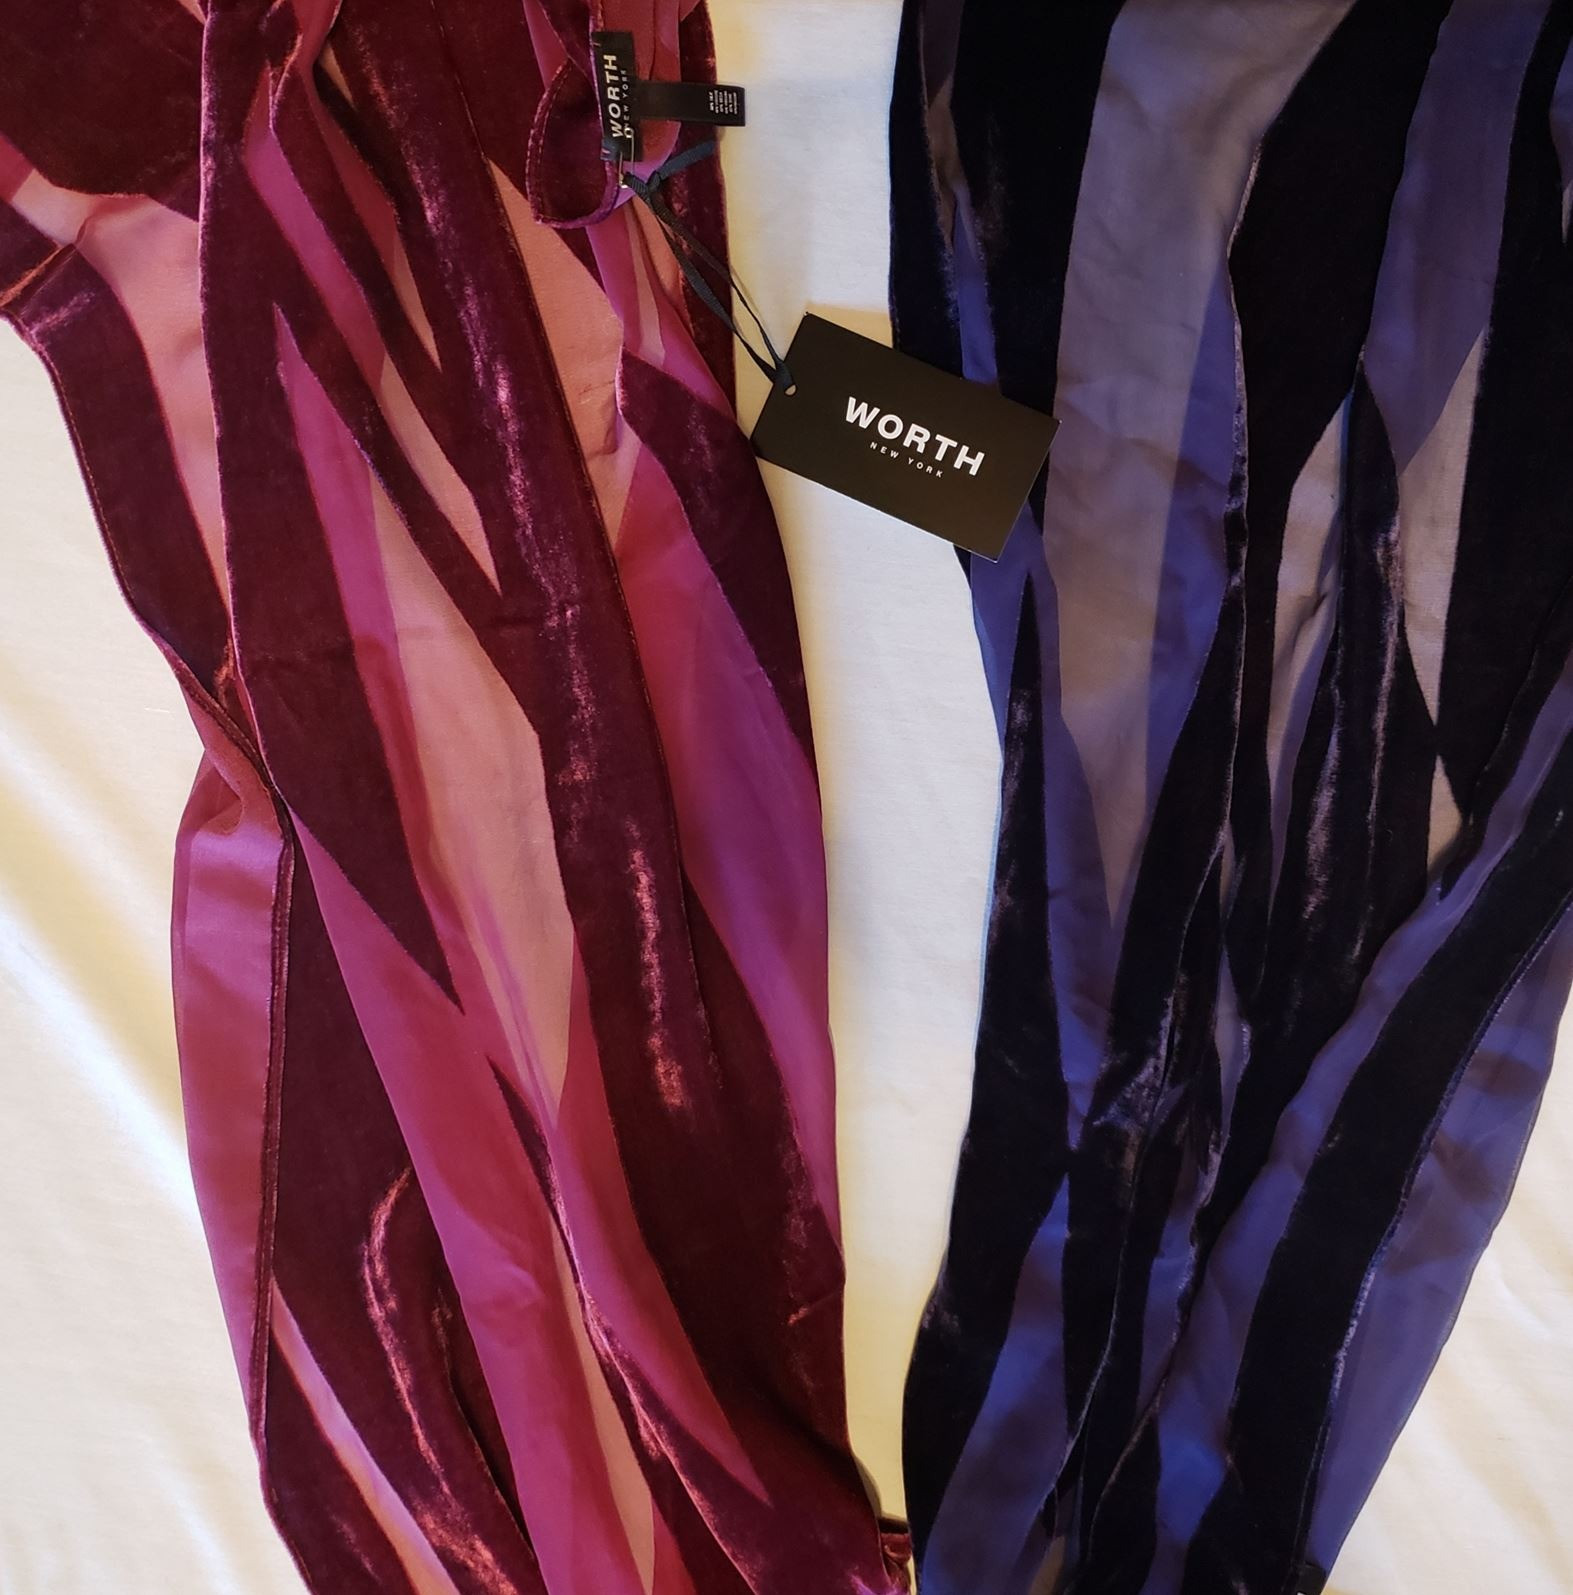 Two scarves W by Worth and a $100 gift card